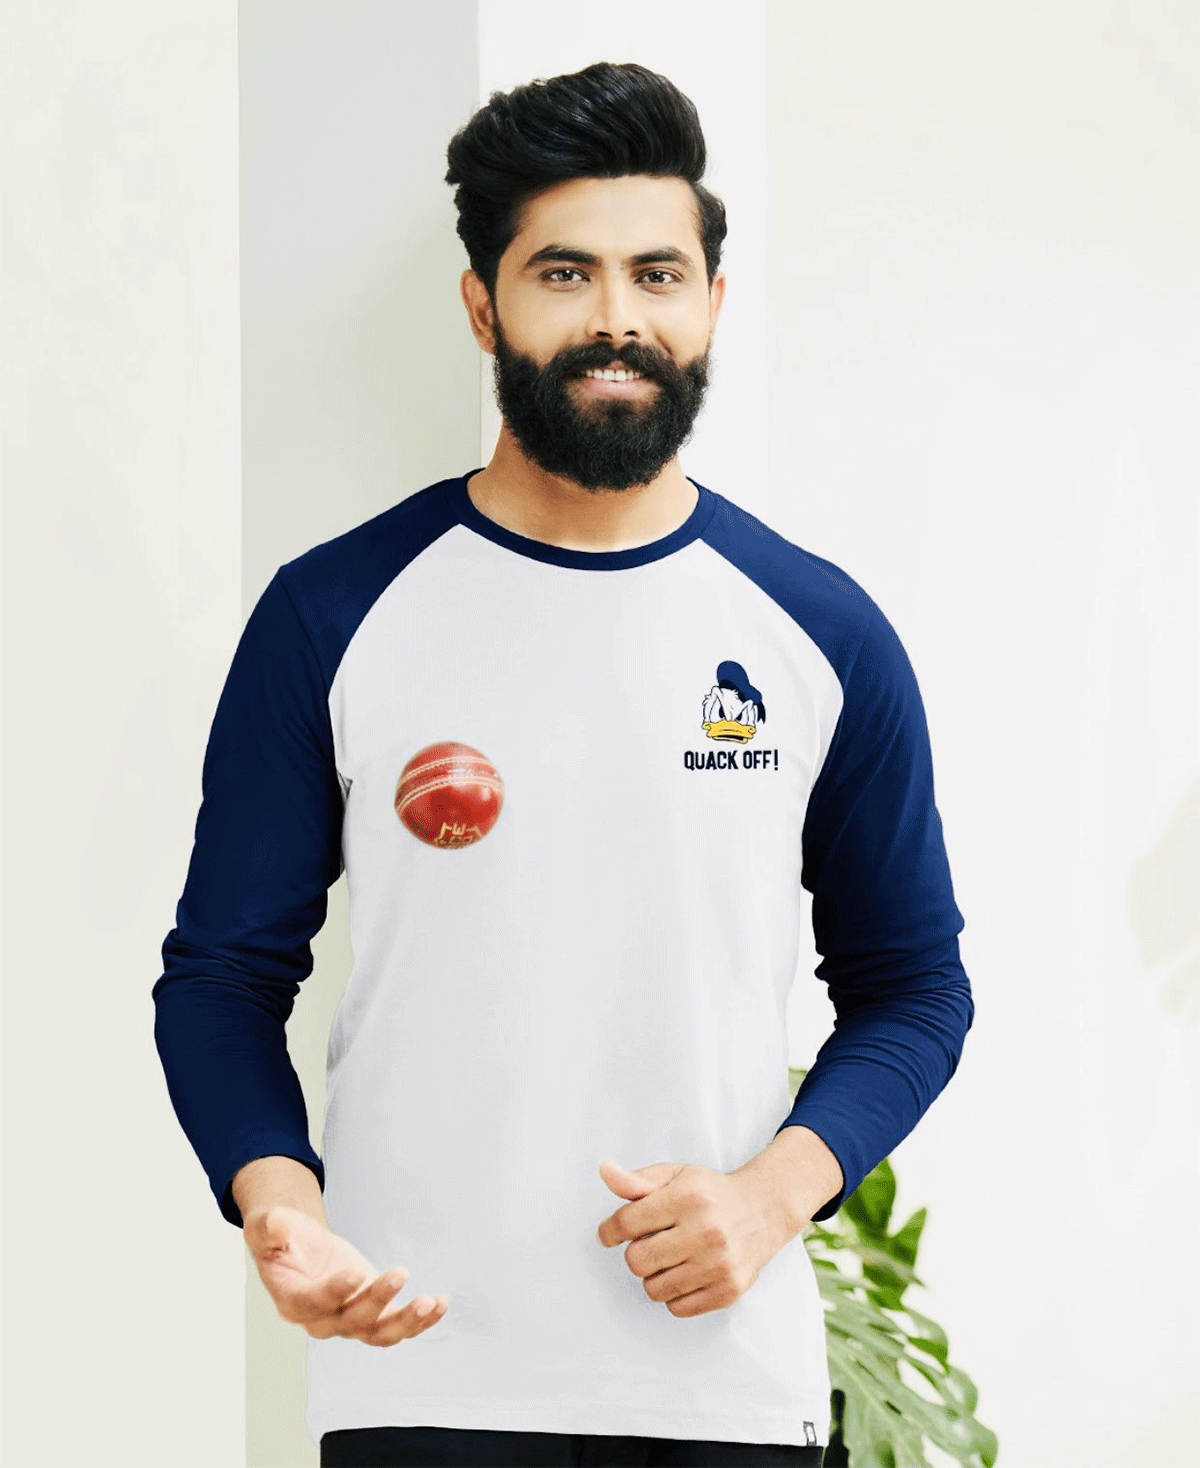 Ravindra Jadeja was recuperating at the NCA having sustained a forearm injury during the New Zealand series in November 2021